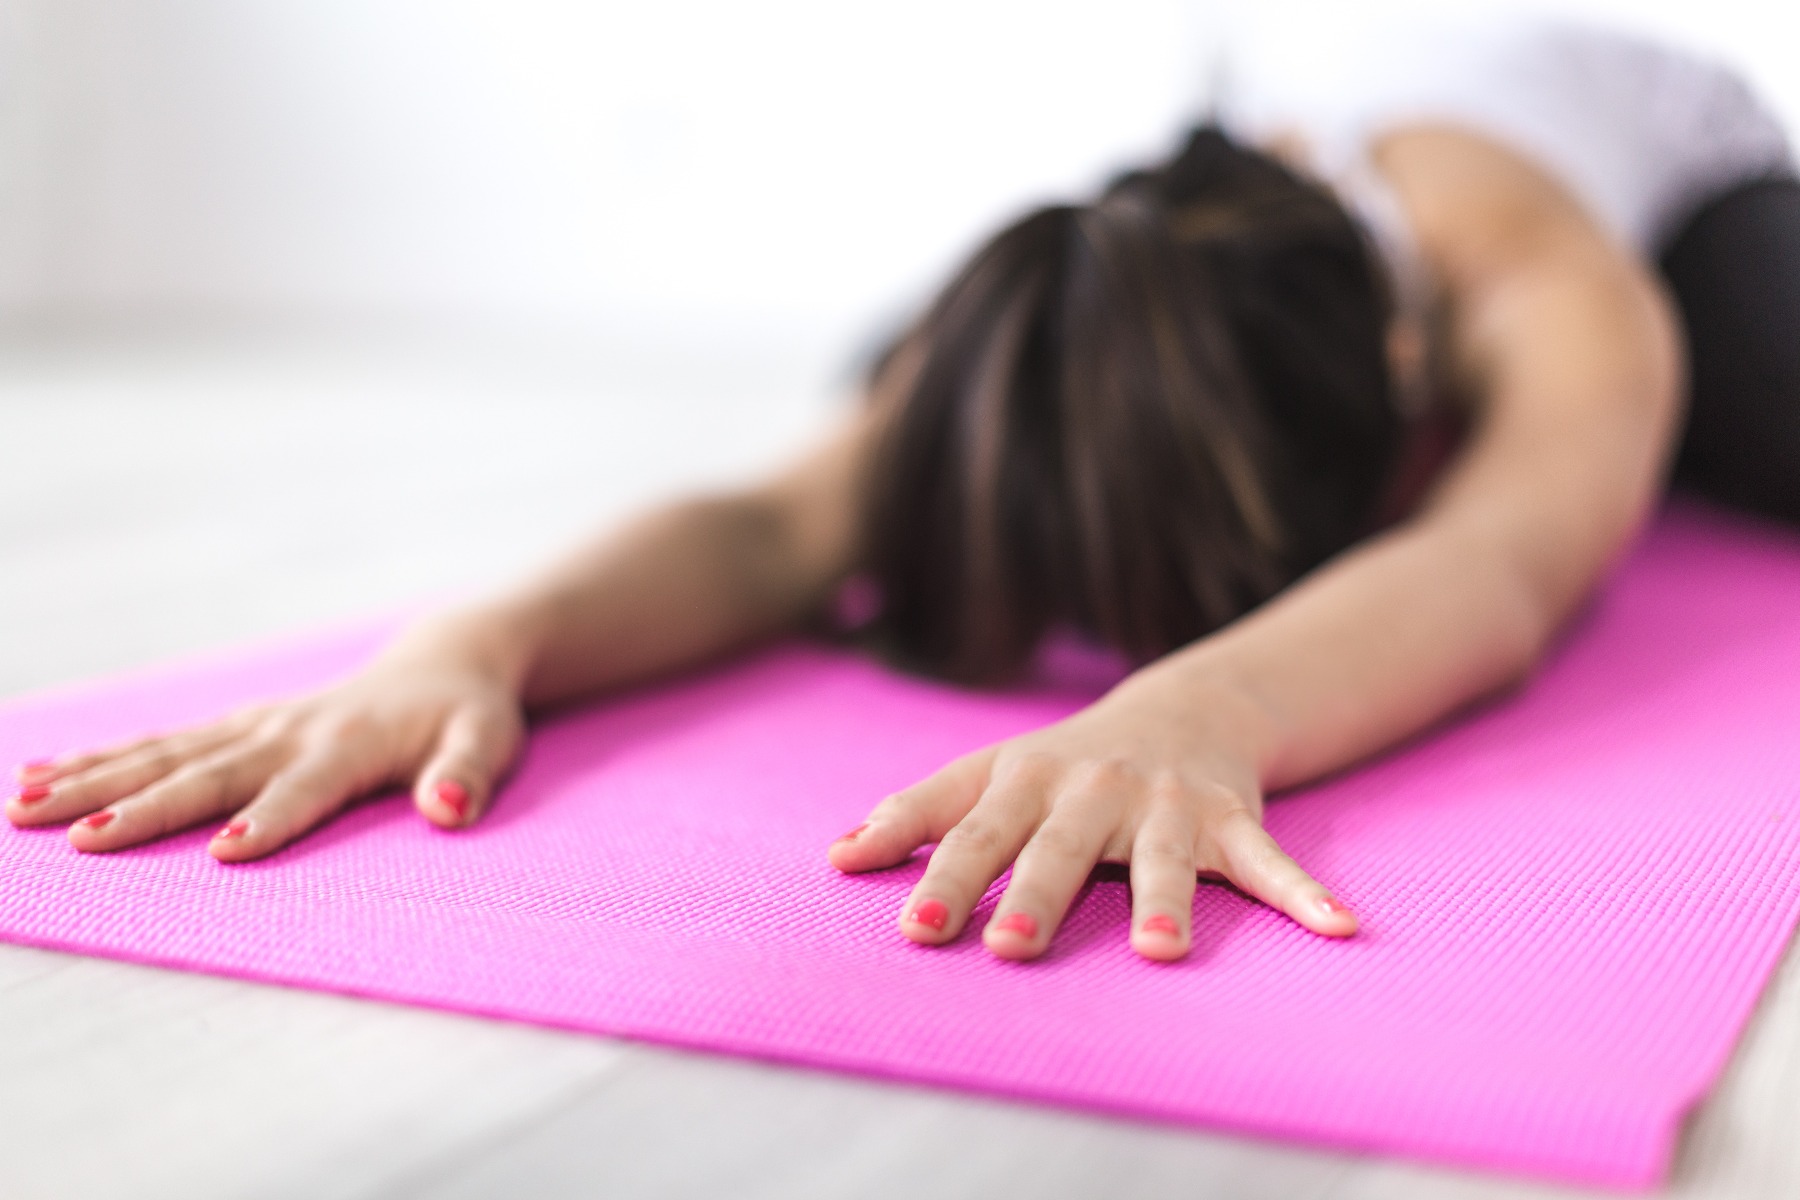 Hot Yoga can be an effective workout, but it isn't for everyone